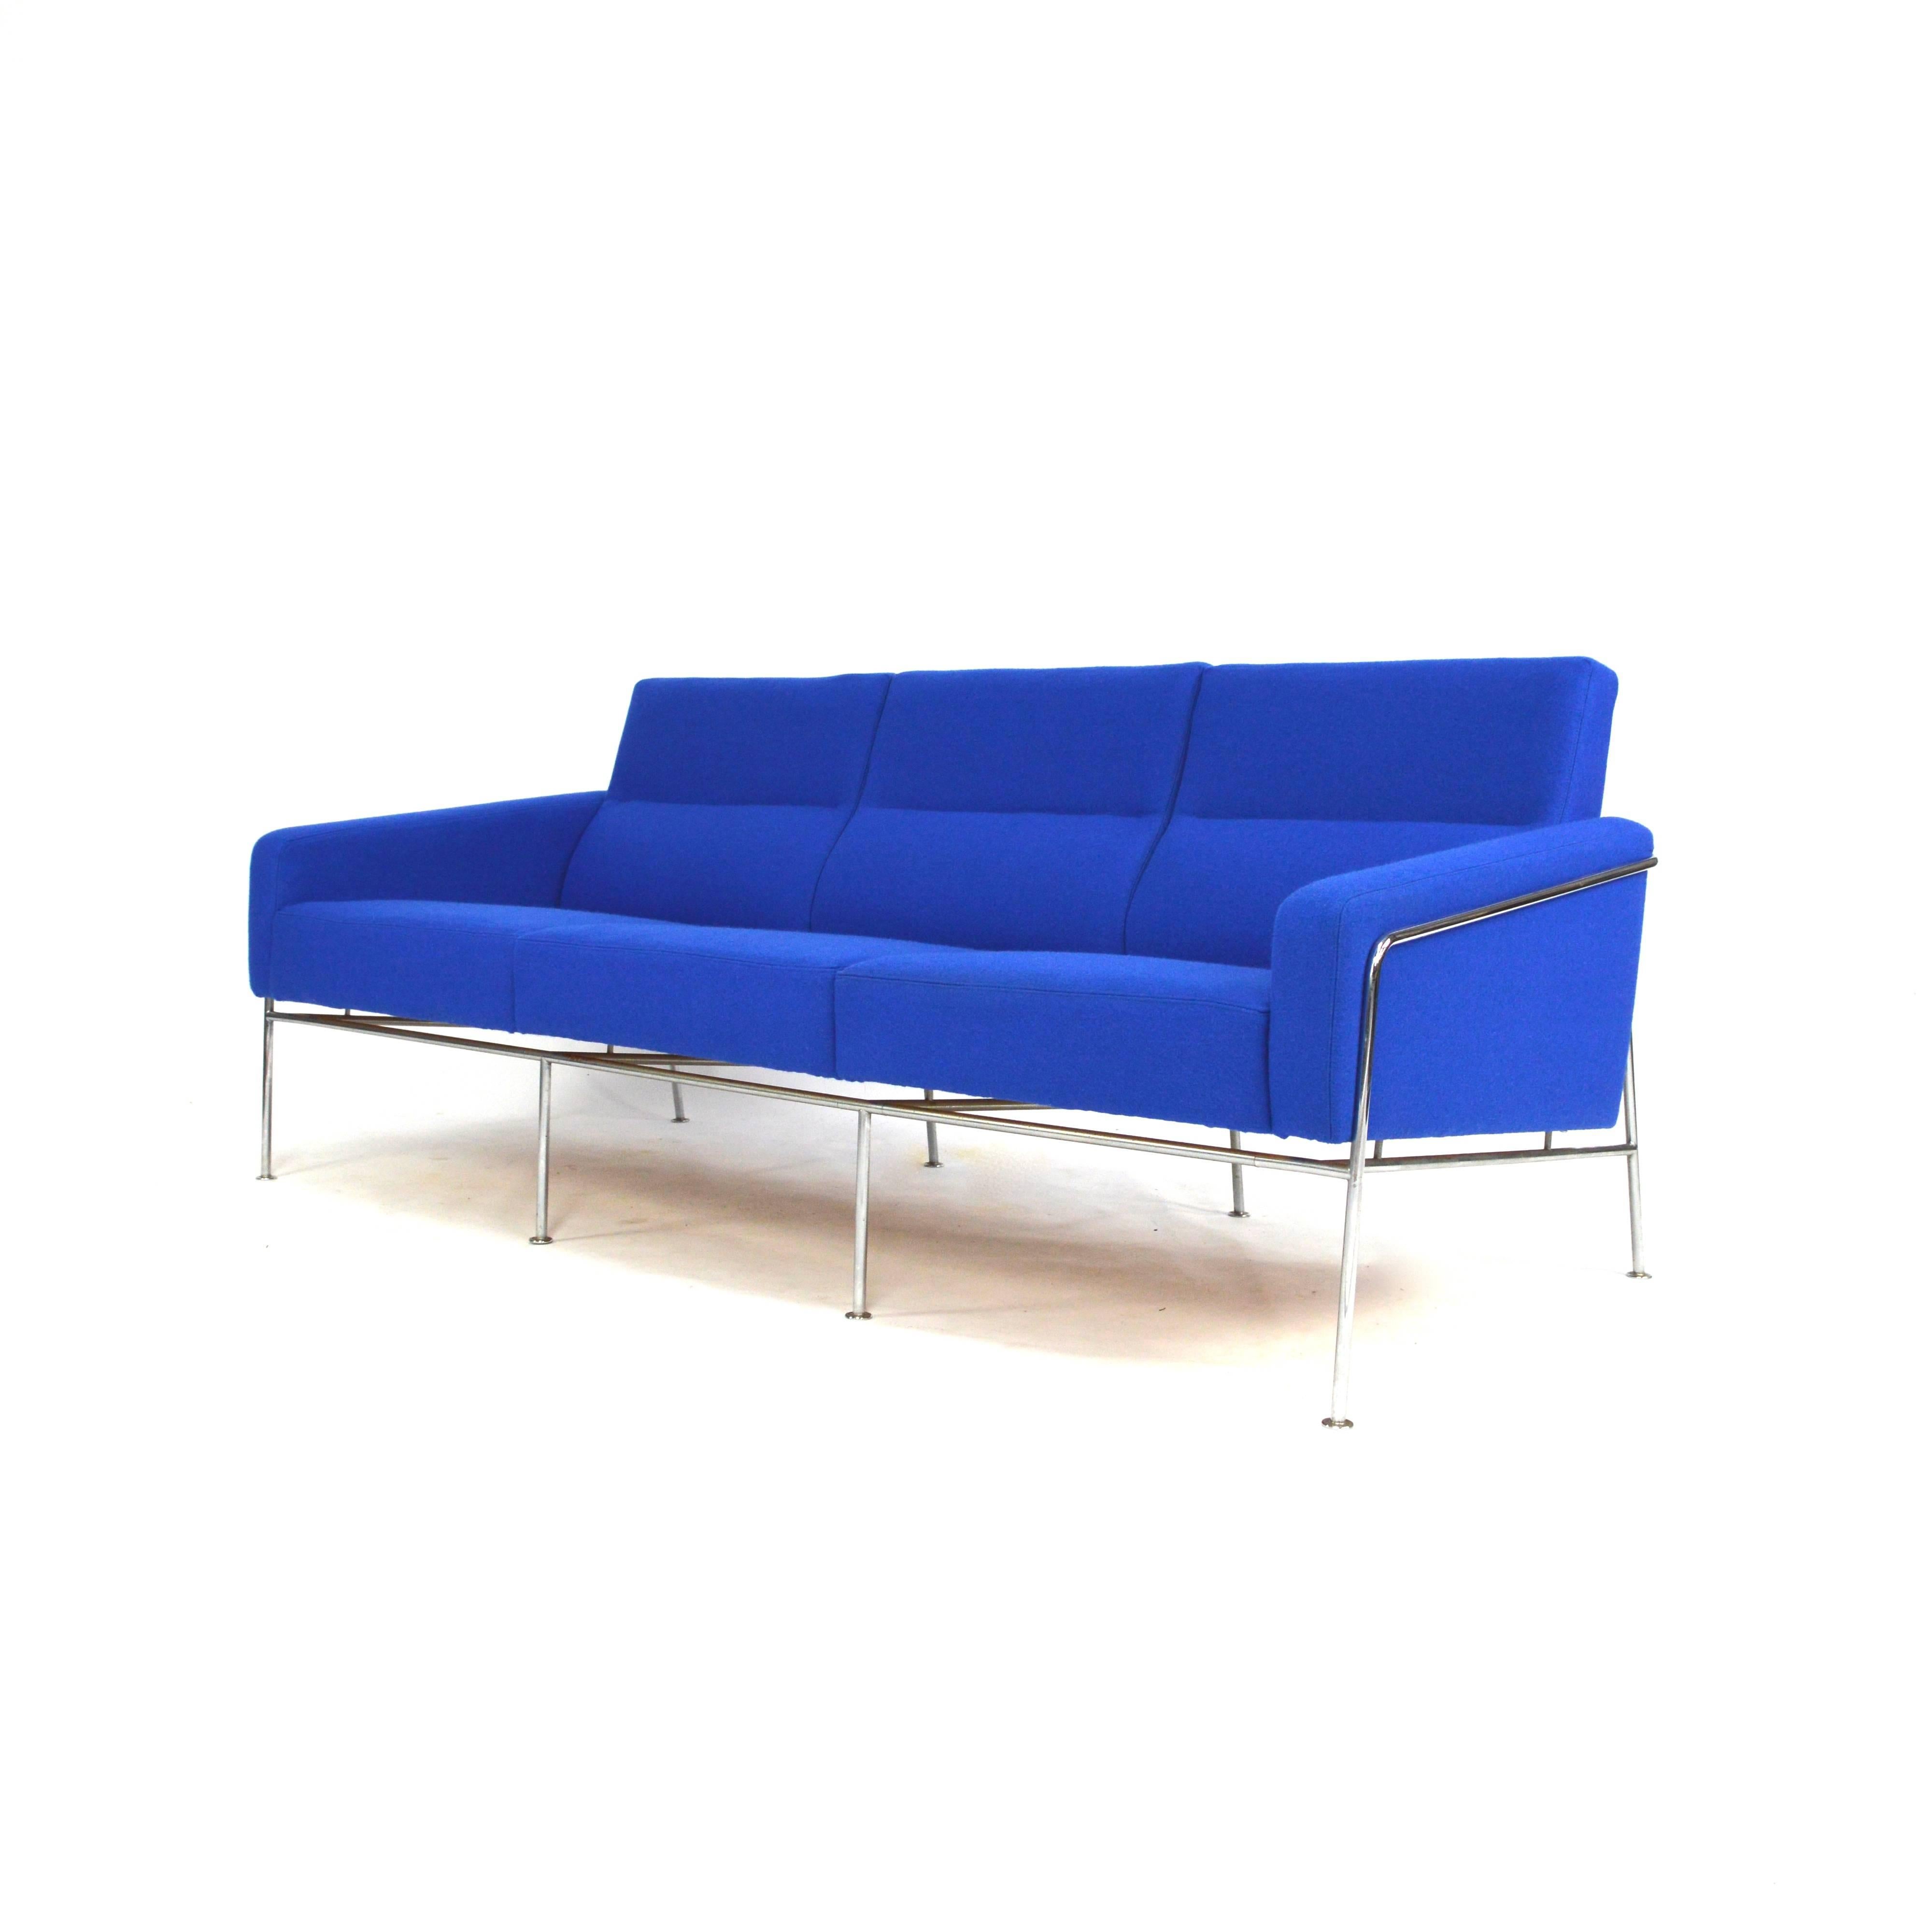 Gorgeous model 3300/3 sofa by Arne Jacobsen for Fritz Hansen. Recently reupholstered and in excellent condition. Labeled with the date and manufacturers label from 1978.

Designer: Arne Jacobsen

Manufacturer: Fritz Hansen (marked with